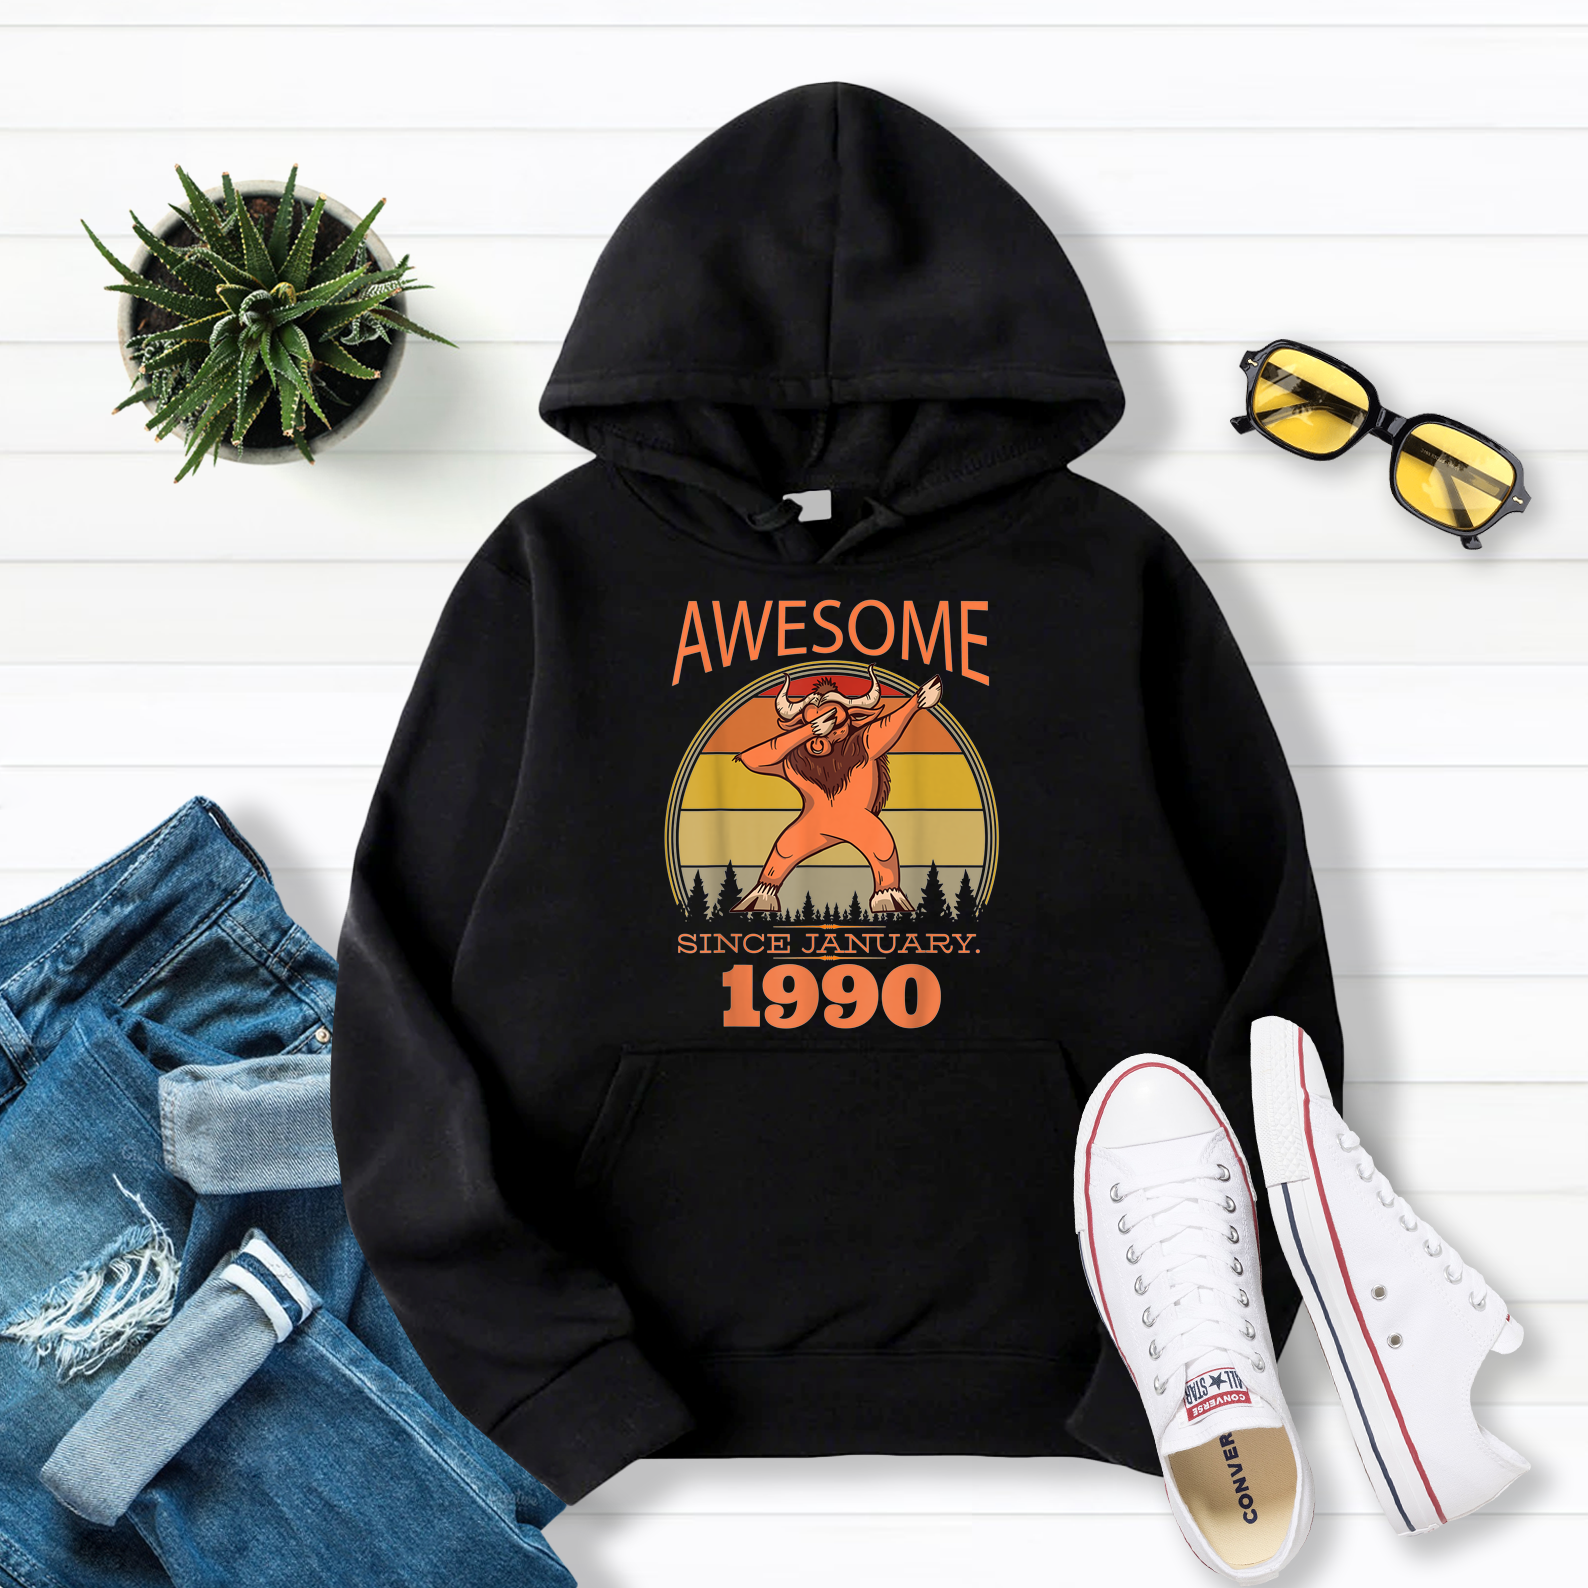 31 Year Old Birthday Awesome Since January 1990 Ox Dabbing Pullover Hoodie Black S-5XL